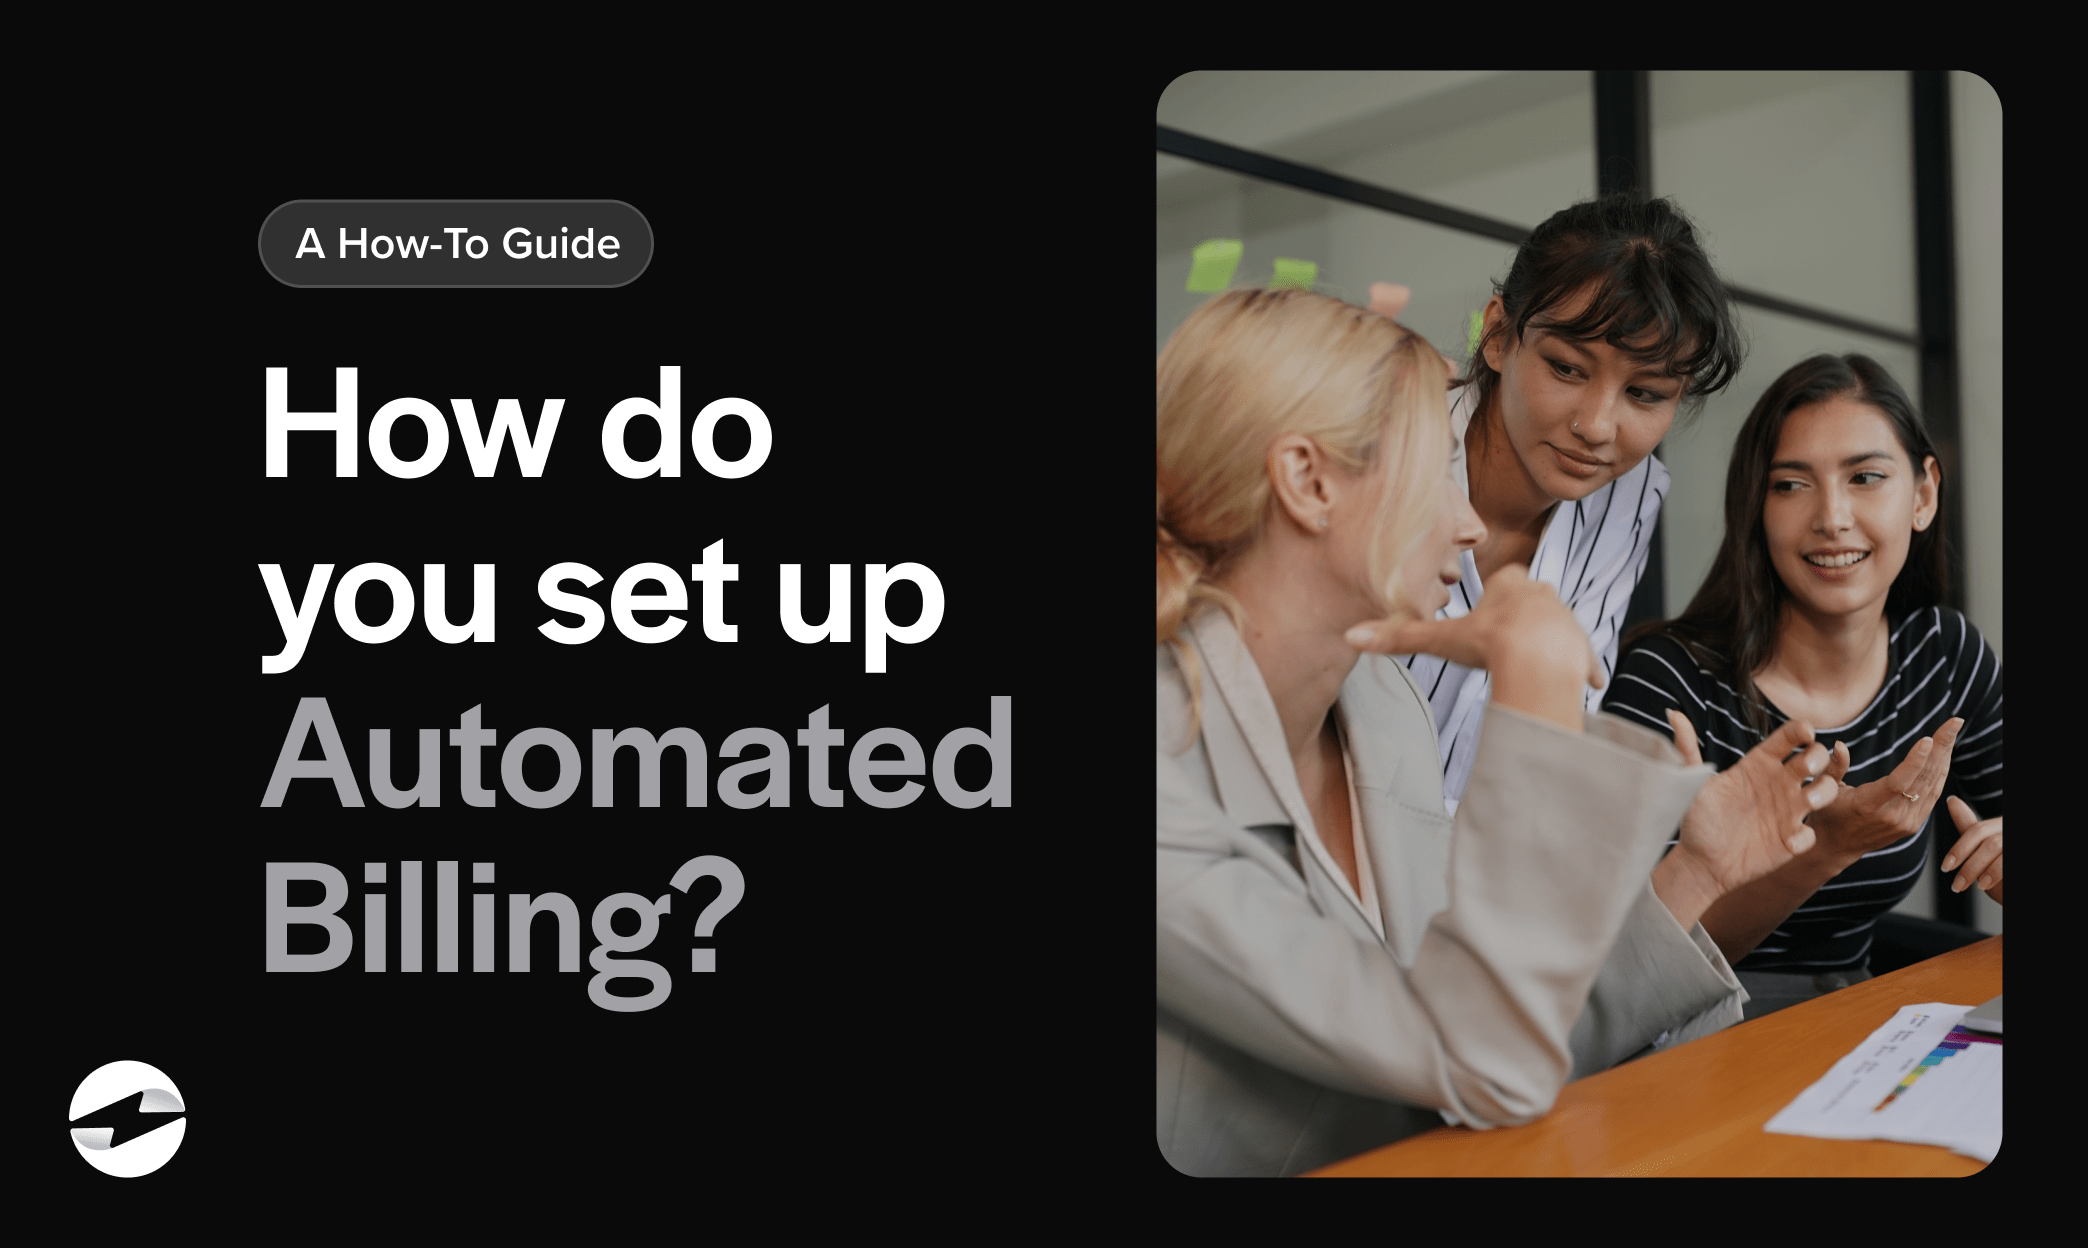 How to set up Automated Billing